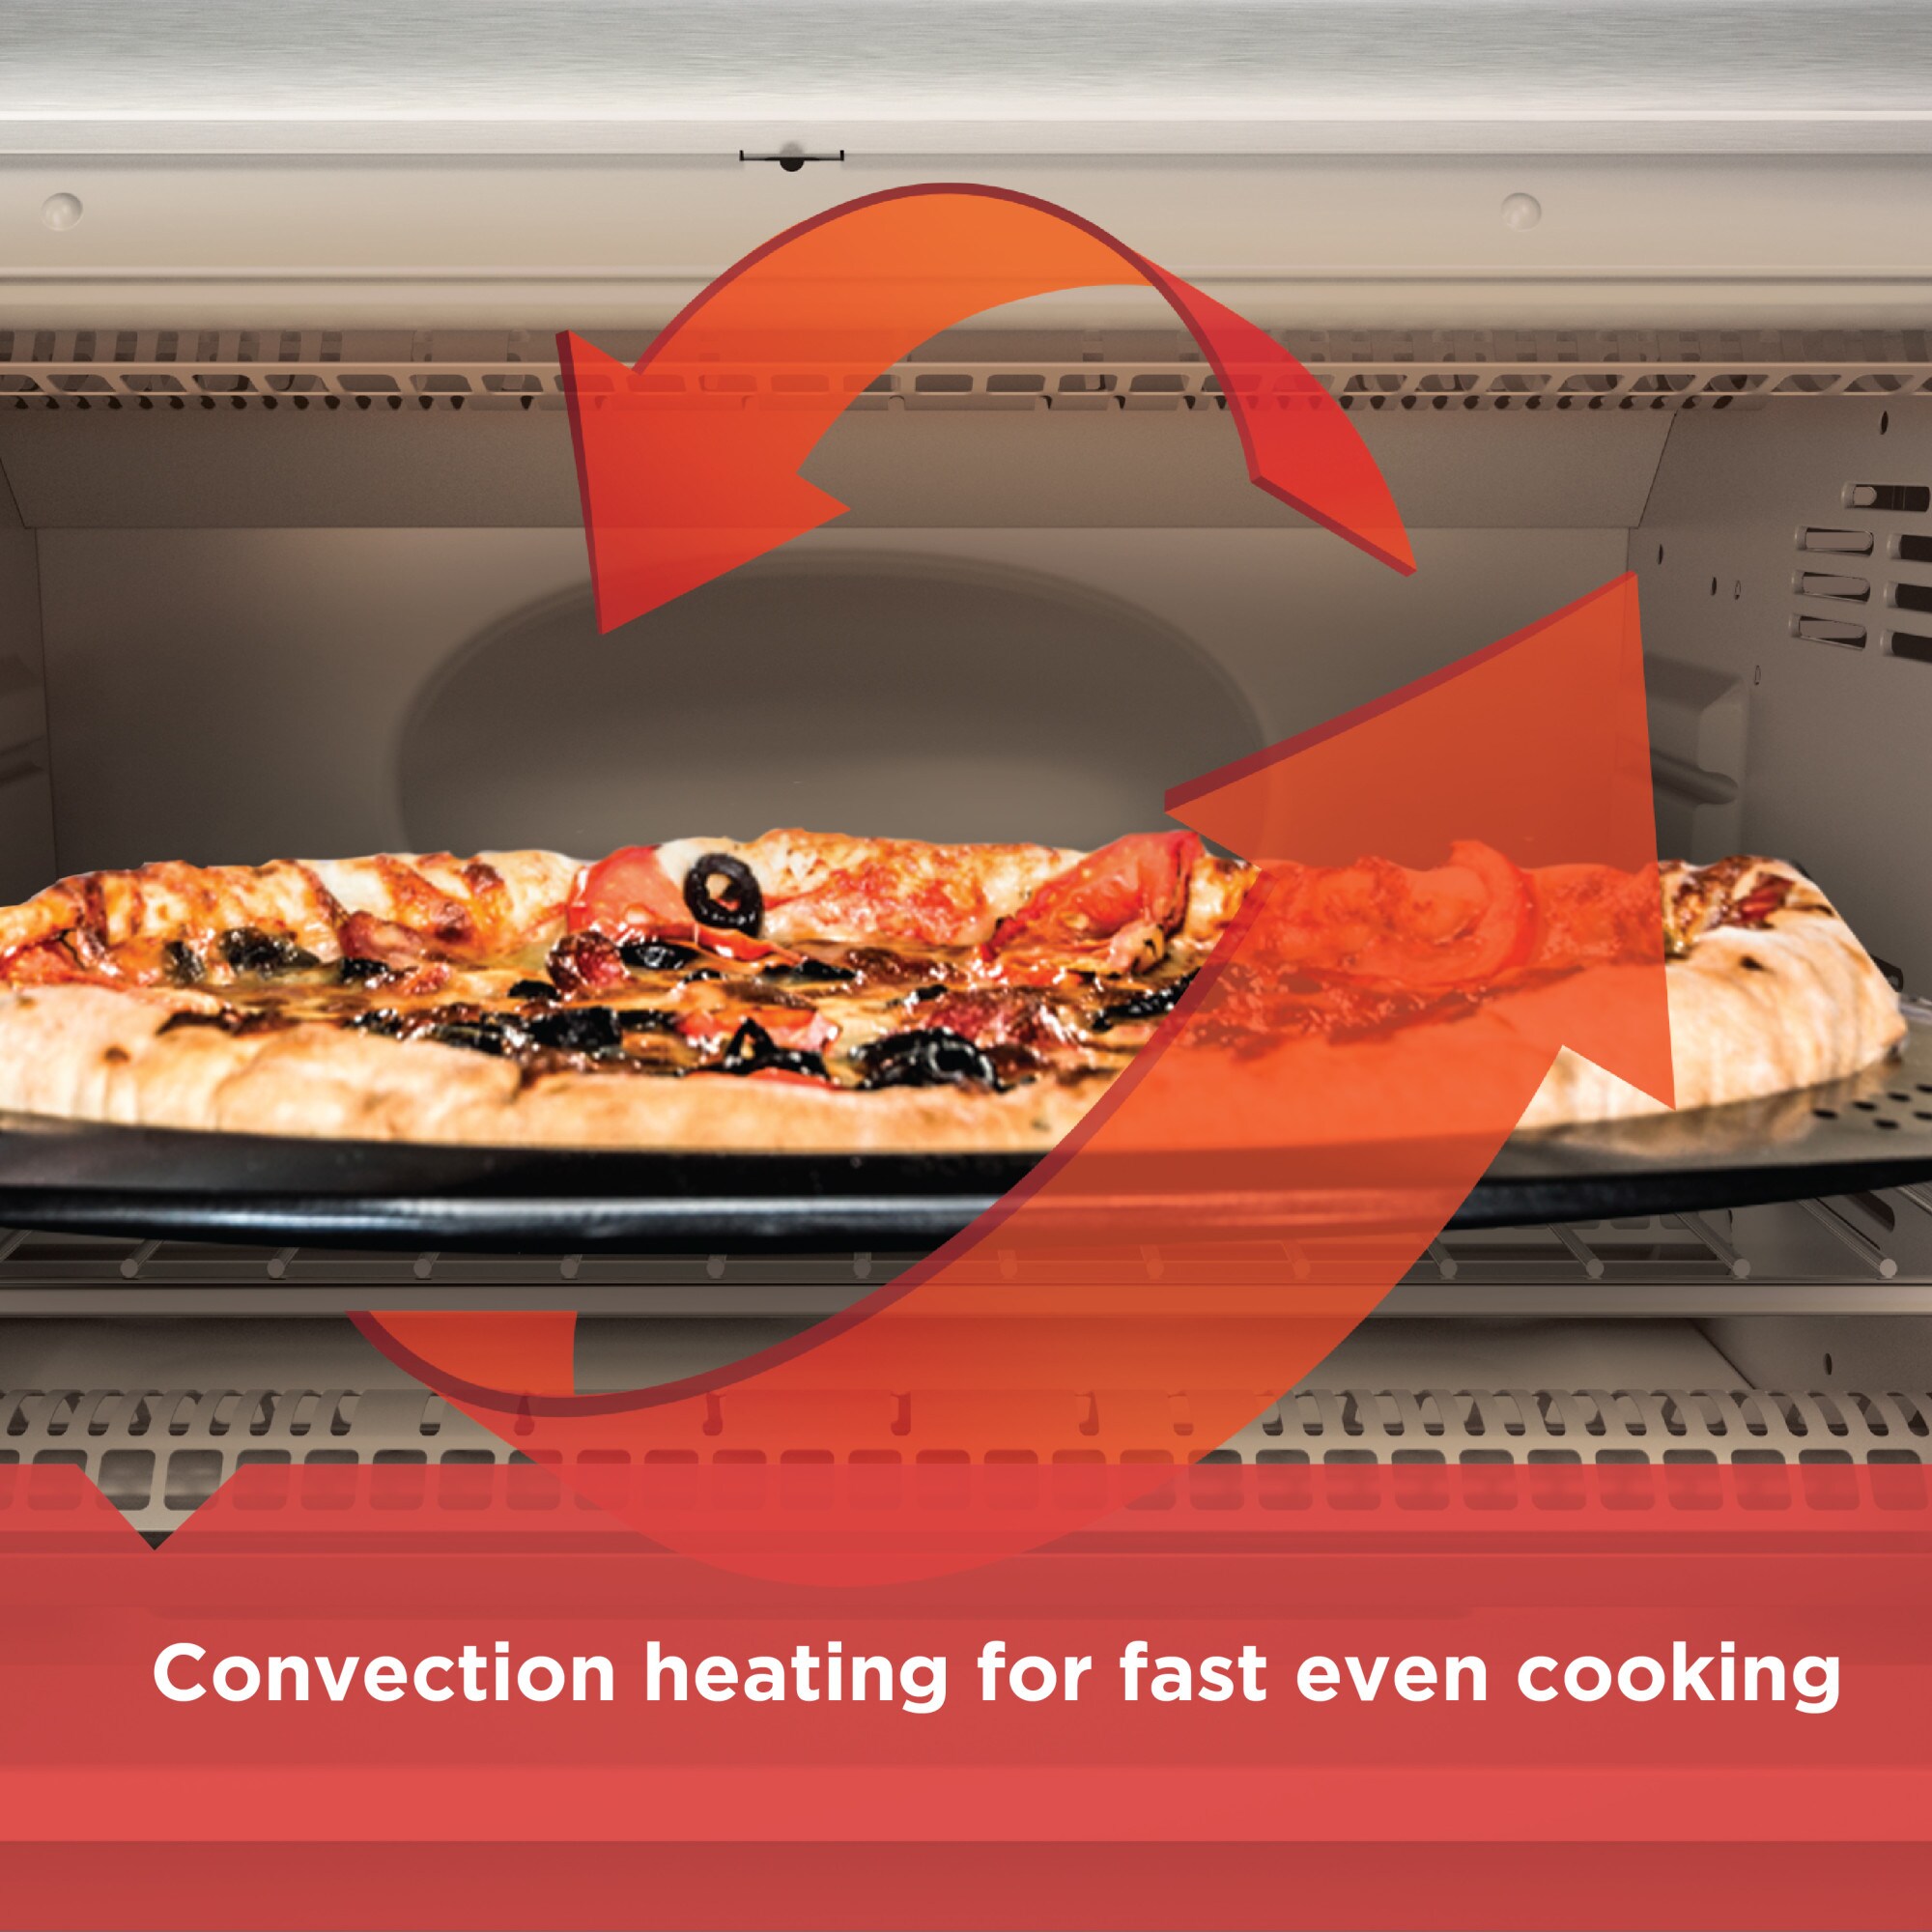 8-Slice Digital Extra-Wide Convection Oven